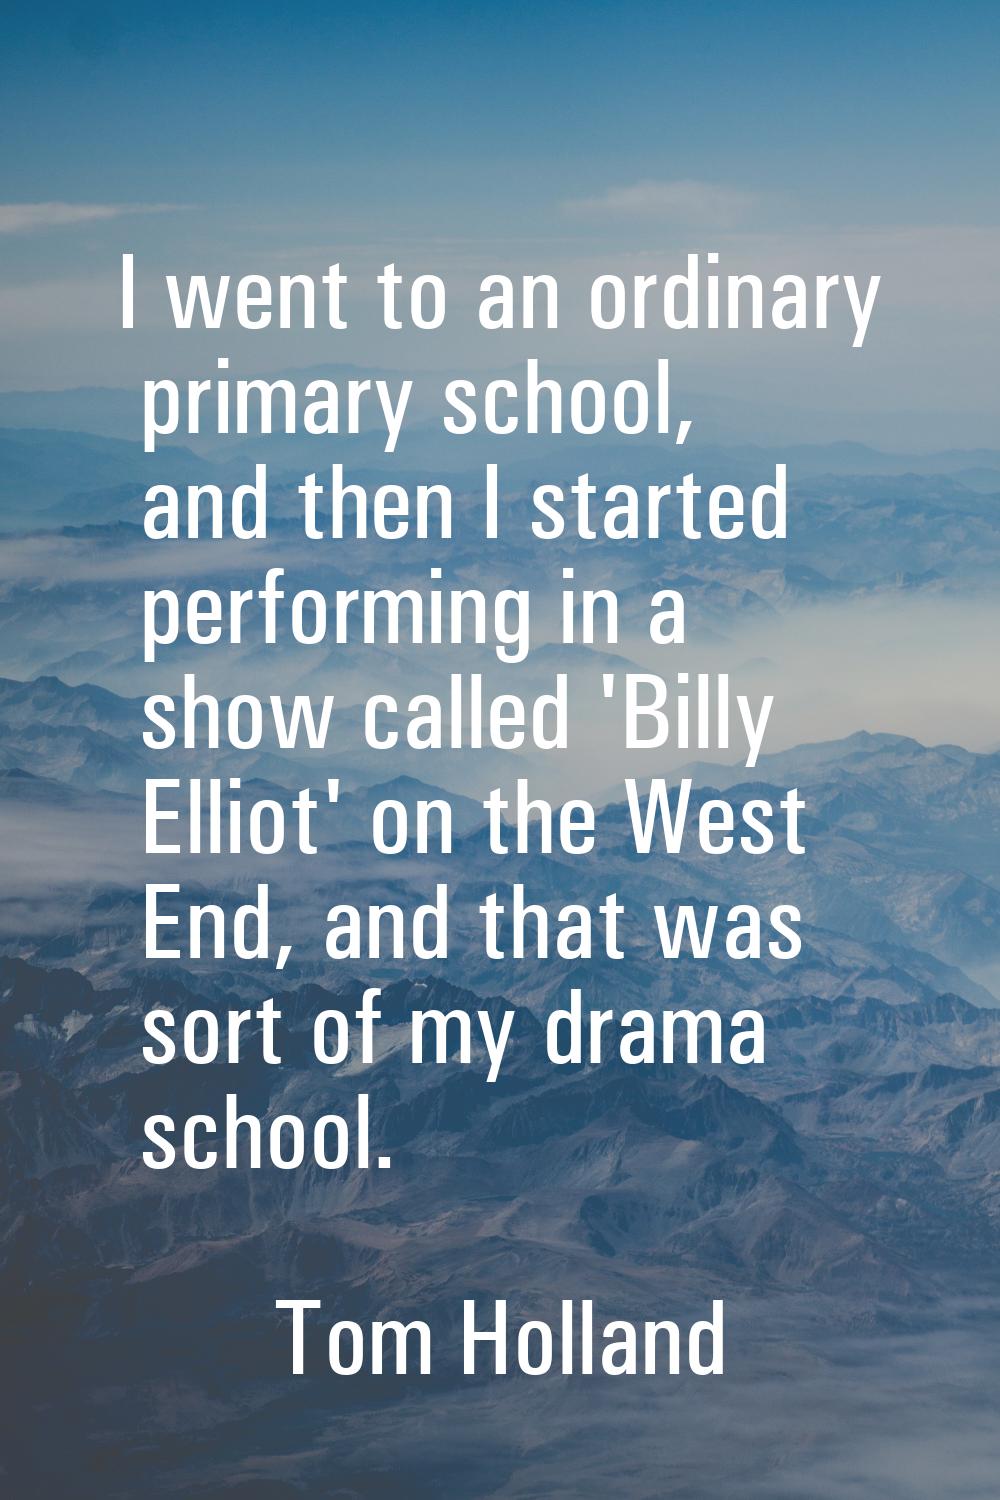 I went to an ordinary primary school, and then I started performing in a show called 'Billy Elliot'